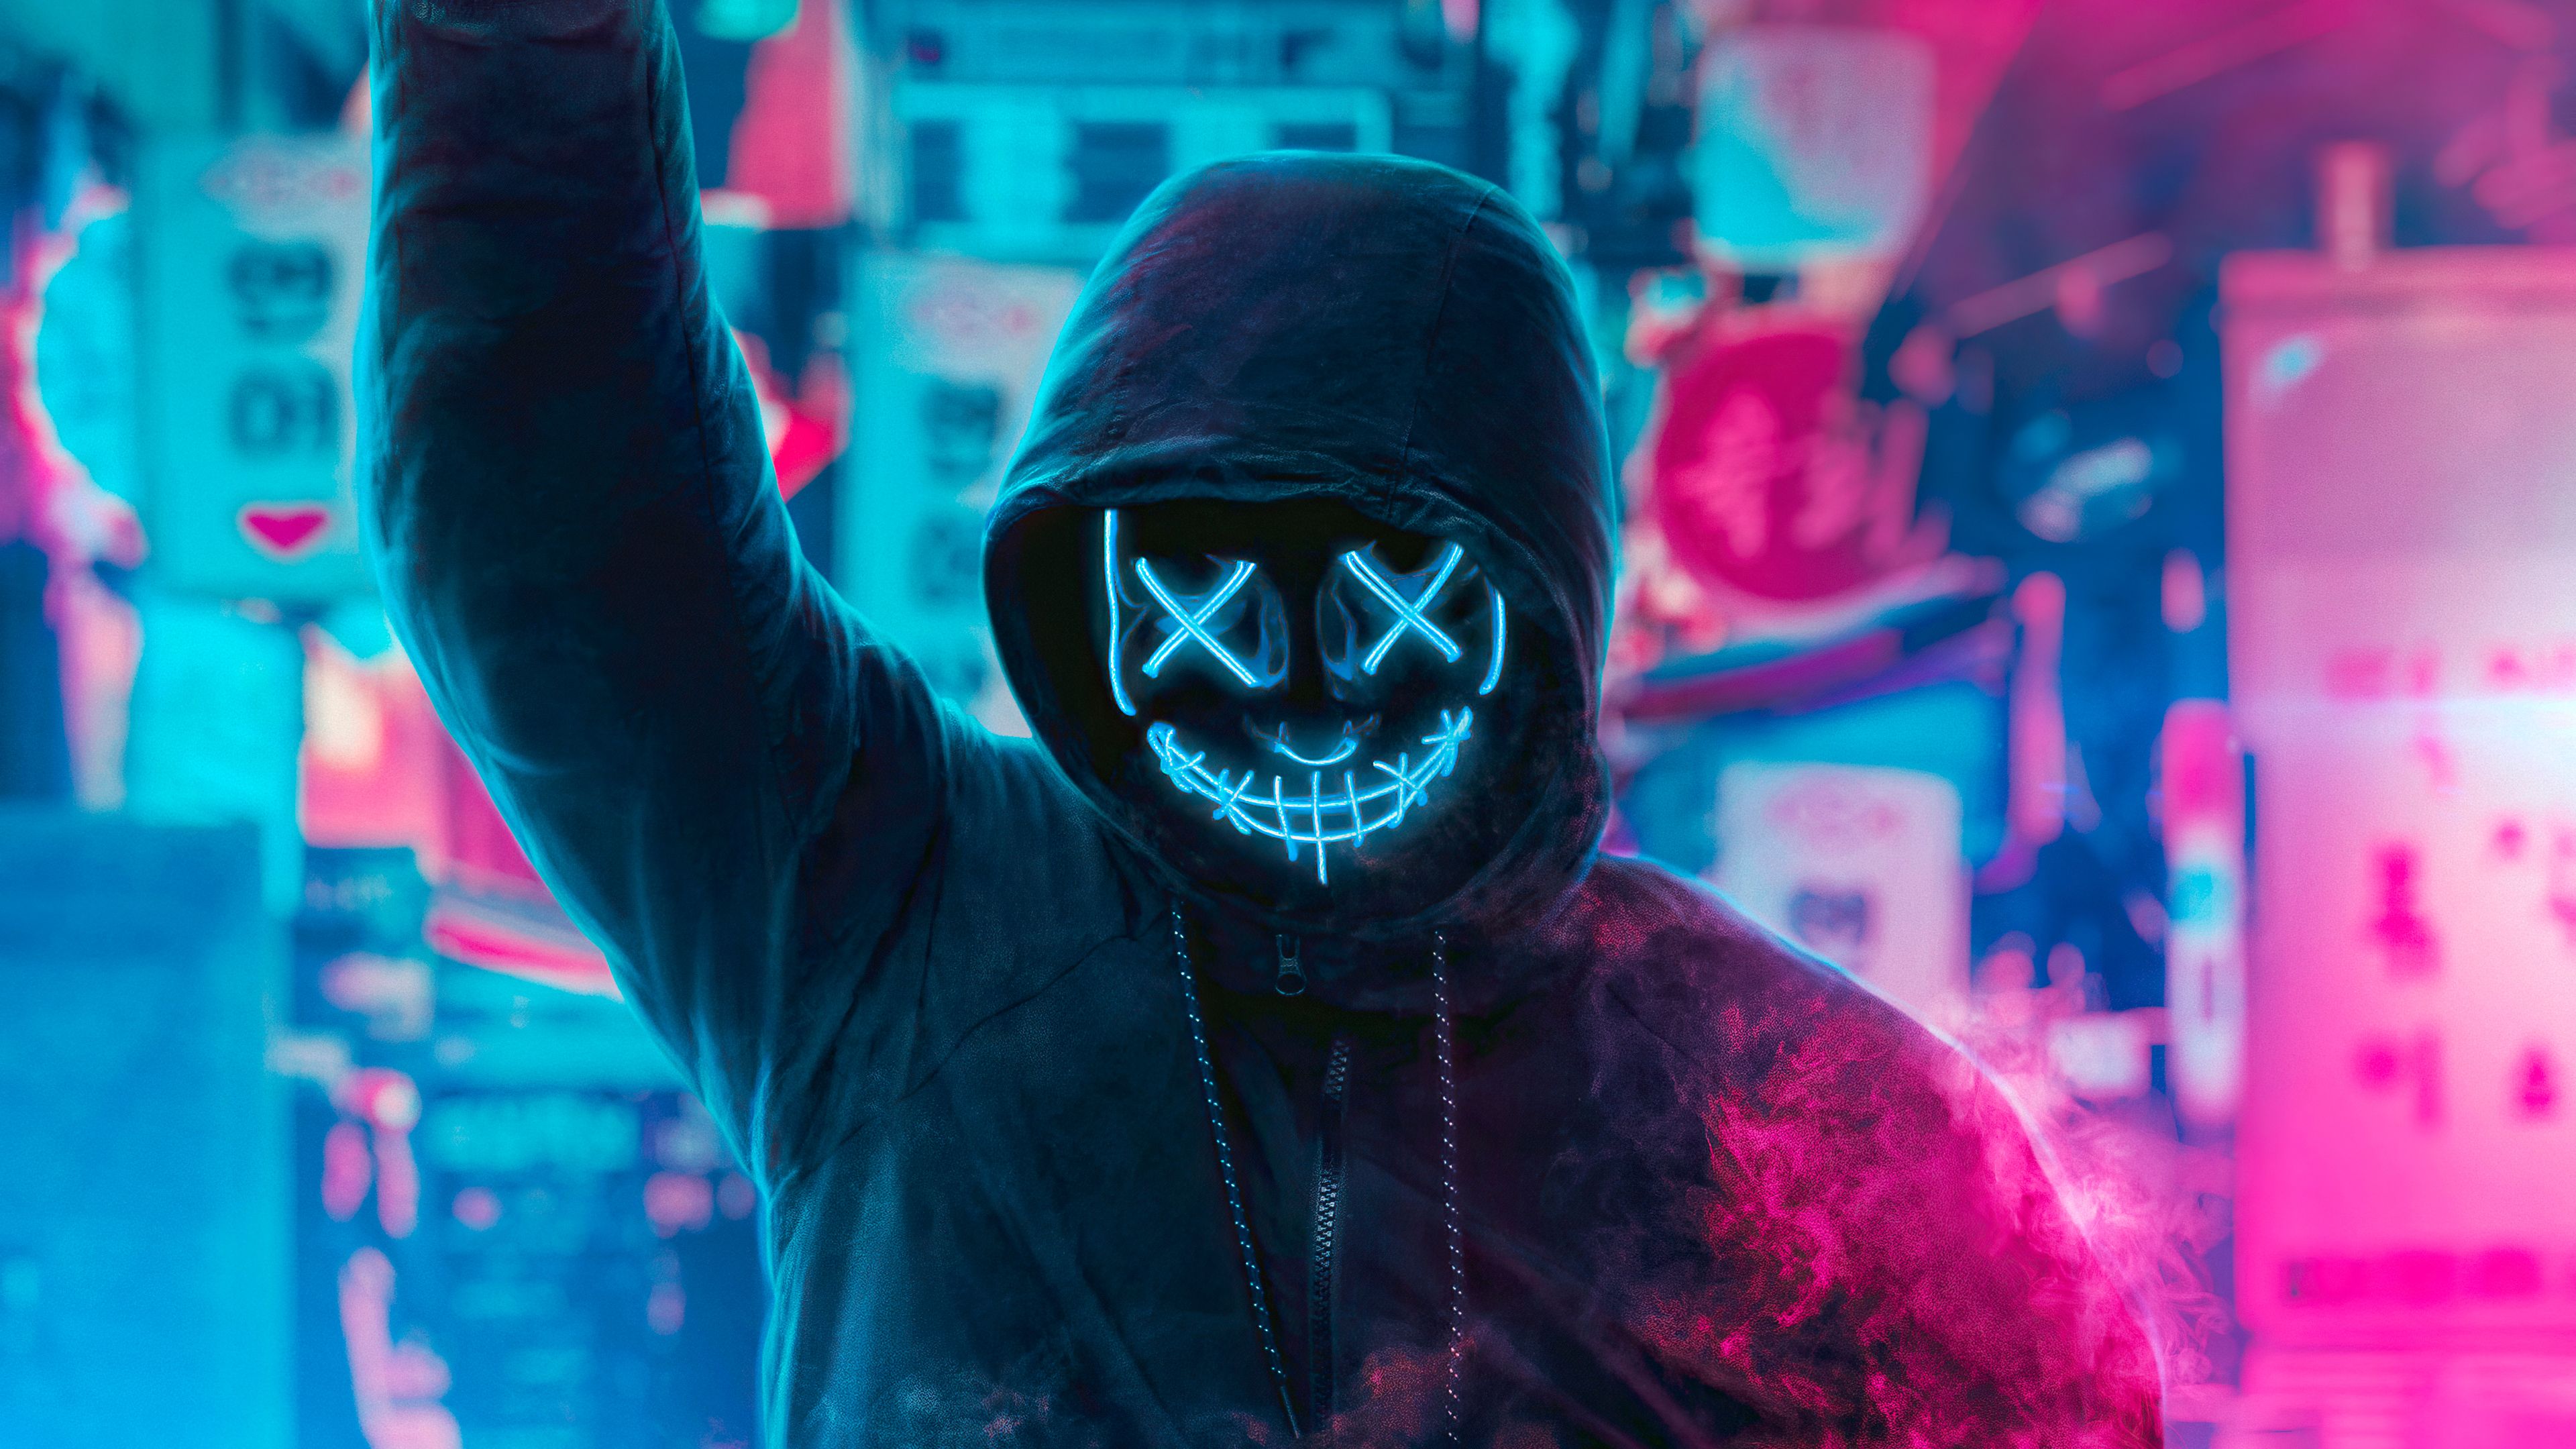 Mask Guy Neon Man With Smoke Bomb 4k 2048x1152 Resolution HD 4k Wallpaper, Image, Background, Photo and Picture